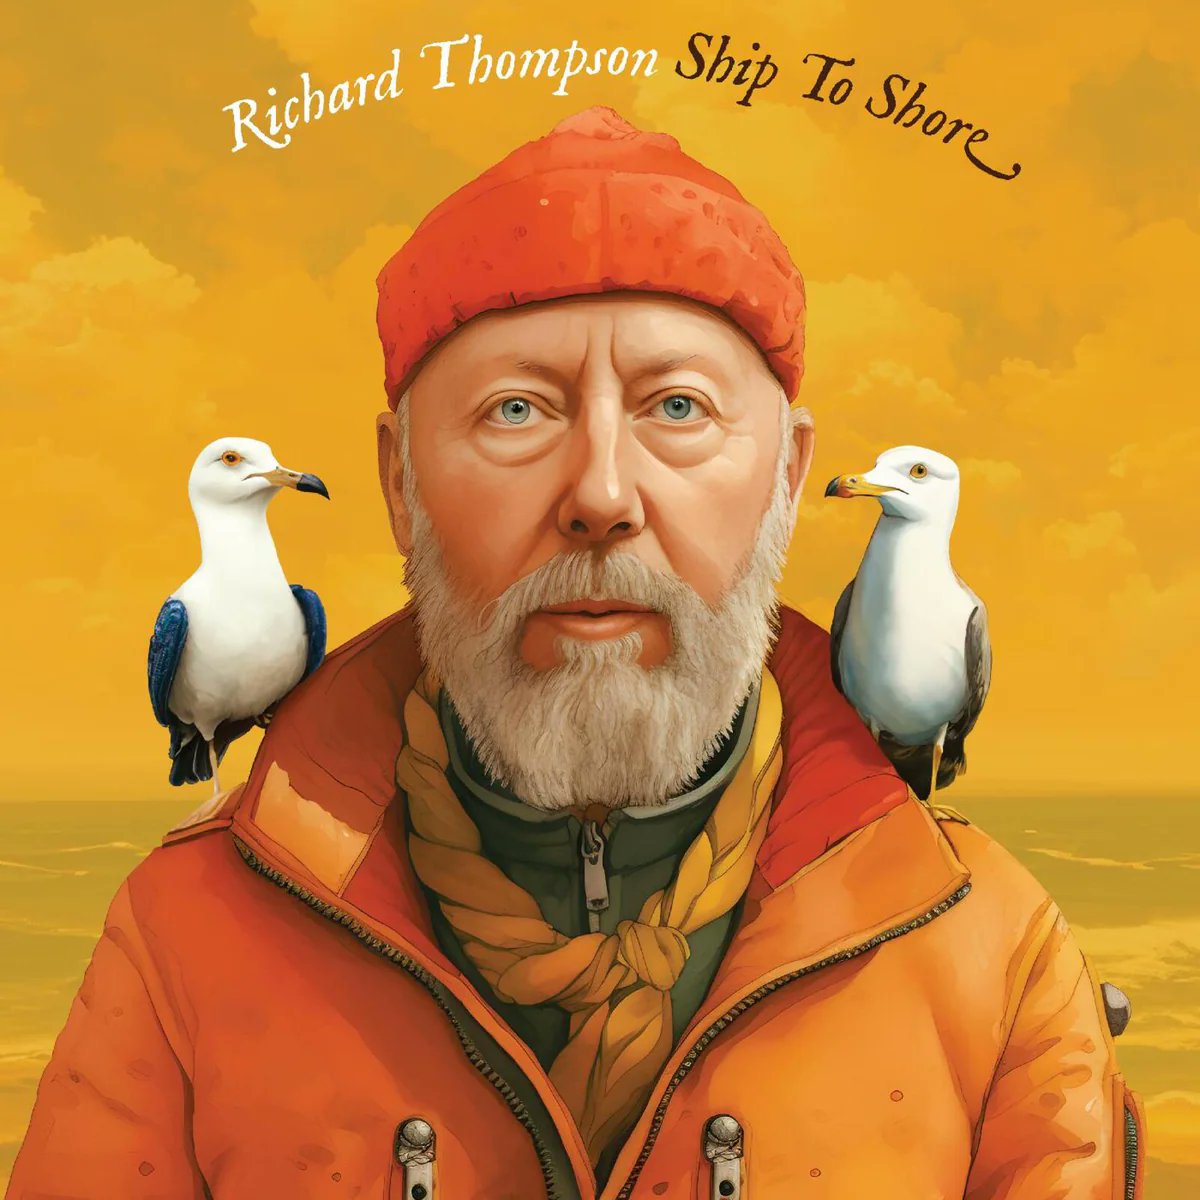 A new @MOJOmagazine Record Club podcast, and it's a good one: Richard Thompson on his new album, Donald Trump, Doc Watson & The Watson Family, Liege & Lief and “BLOODBATHS OF LUST”! Available now on Apple, Spotify and wherever you find your podcasts.